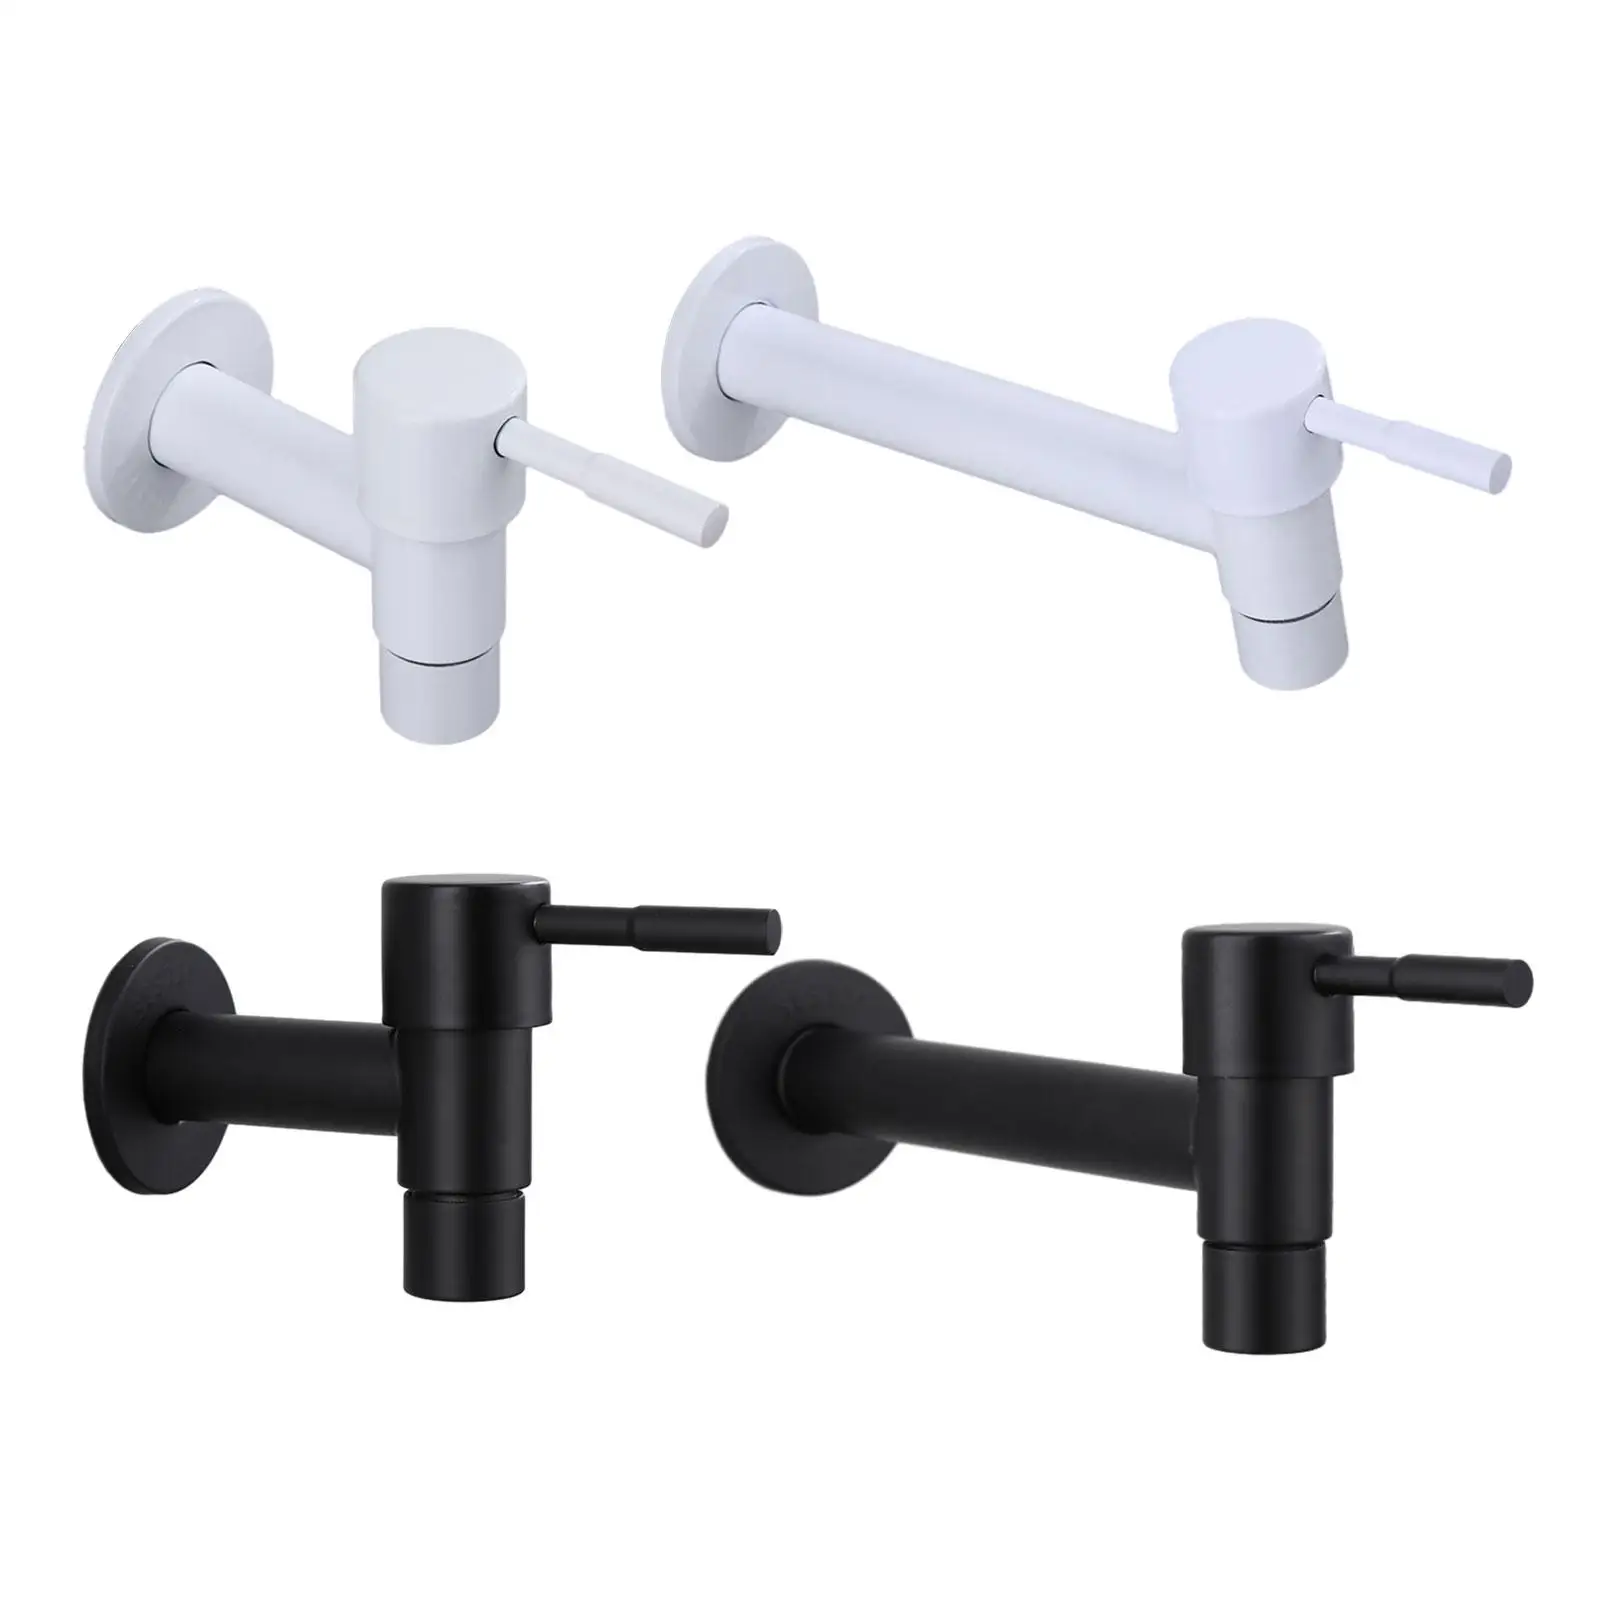 Kitchen Sink Faucets Vintage Tap Anti Rust Water Taps Bathroom Shower Mixer Tap for Washbasin Kitchen Bath Tub Laundry Bathroom